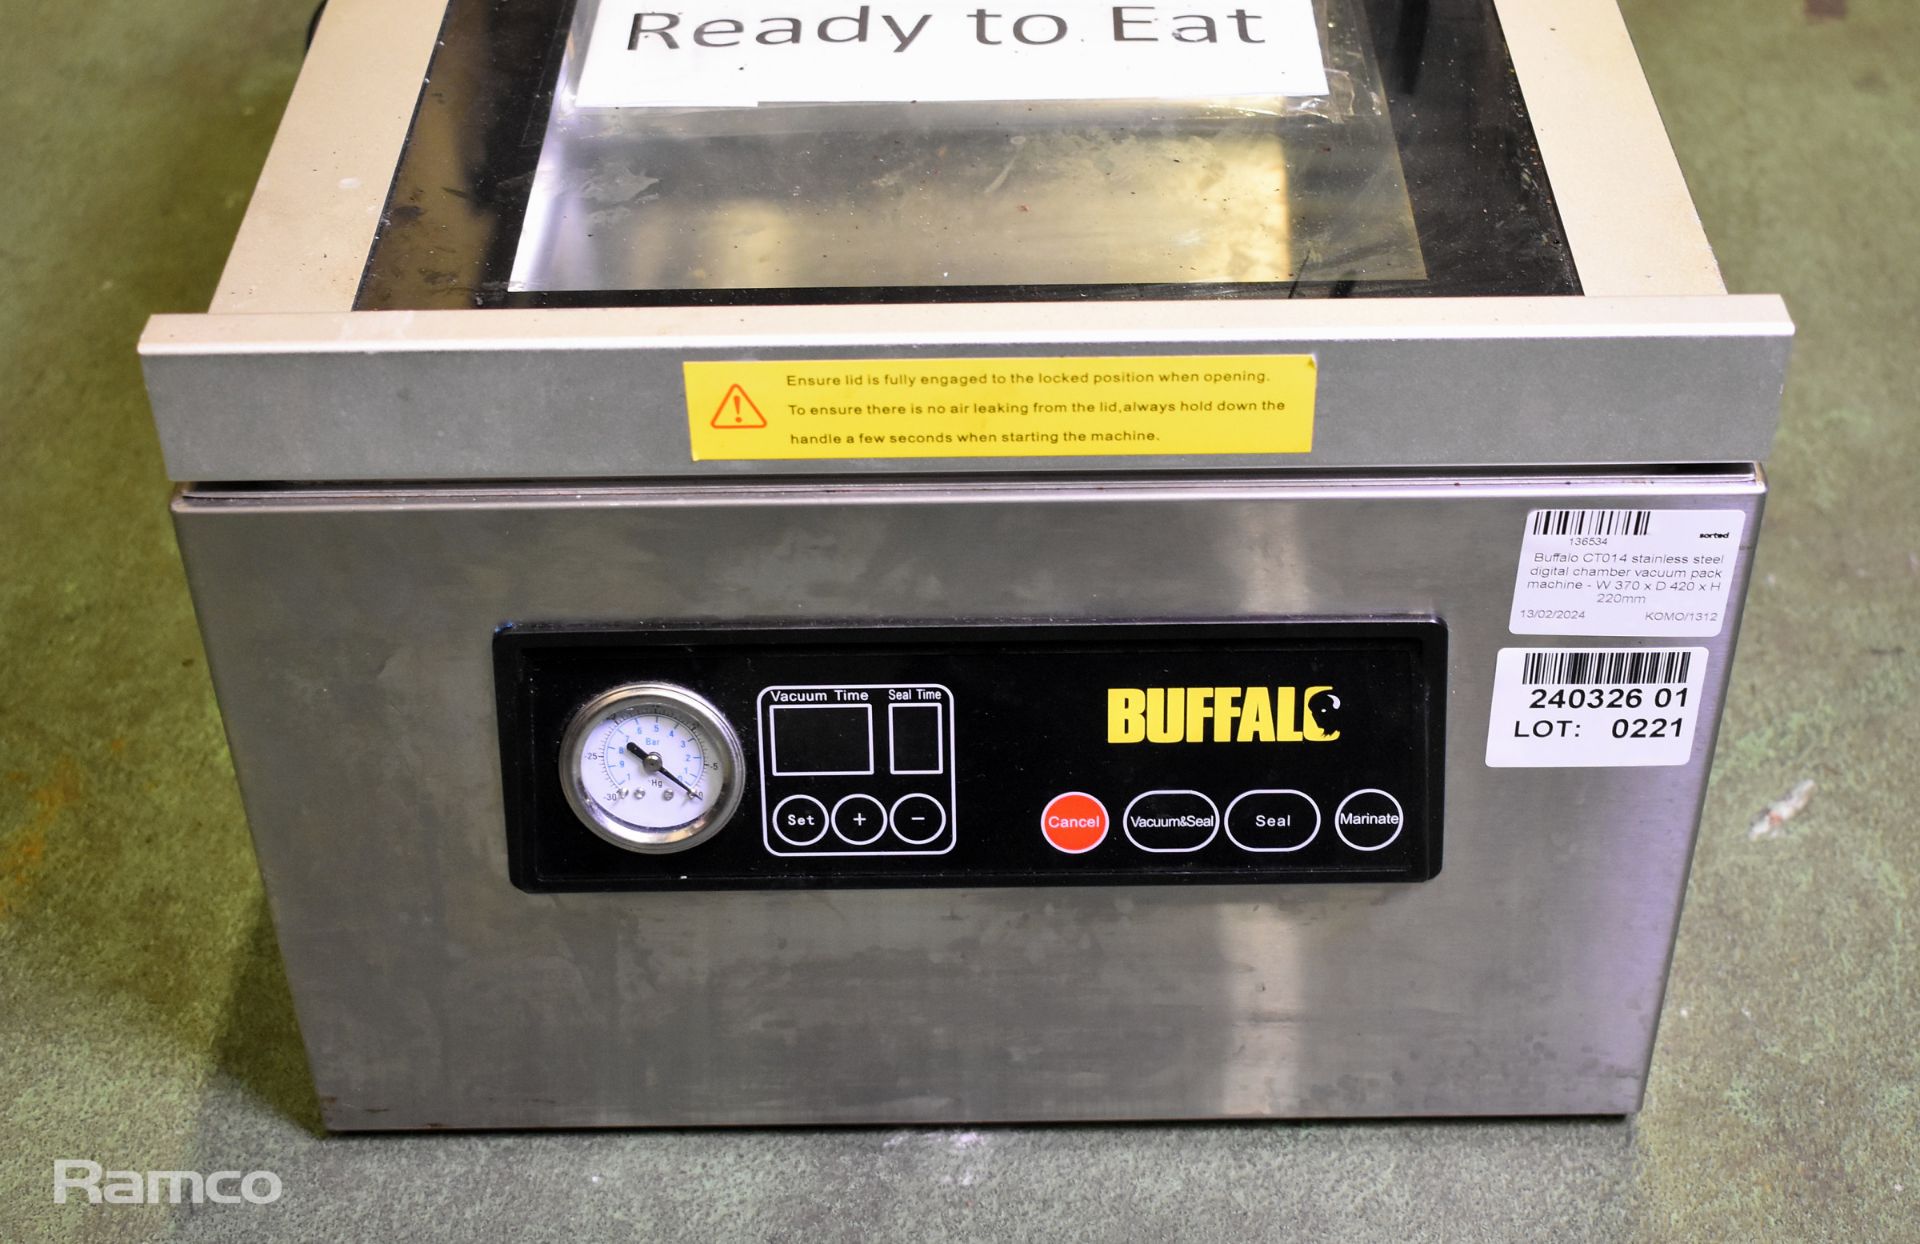 Buffalo CT014 stainless steel digital chamber vacuum pack machine - W 370 x D 420 x H 220mm - Image 2 of 8